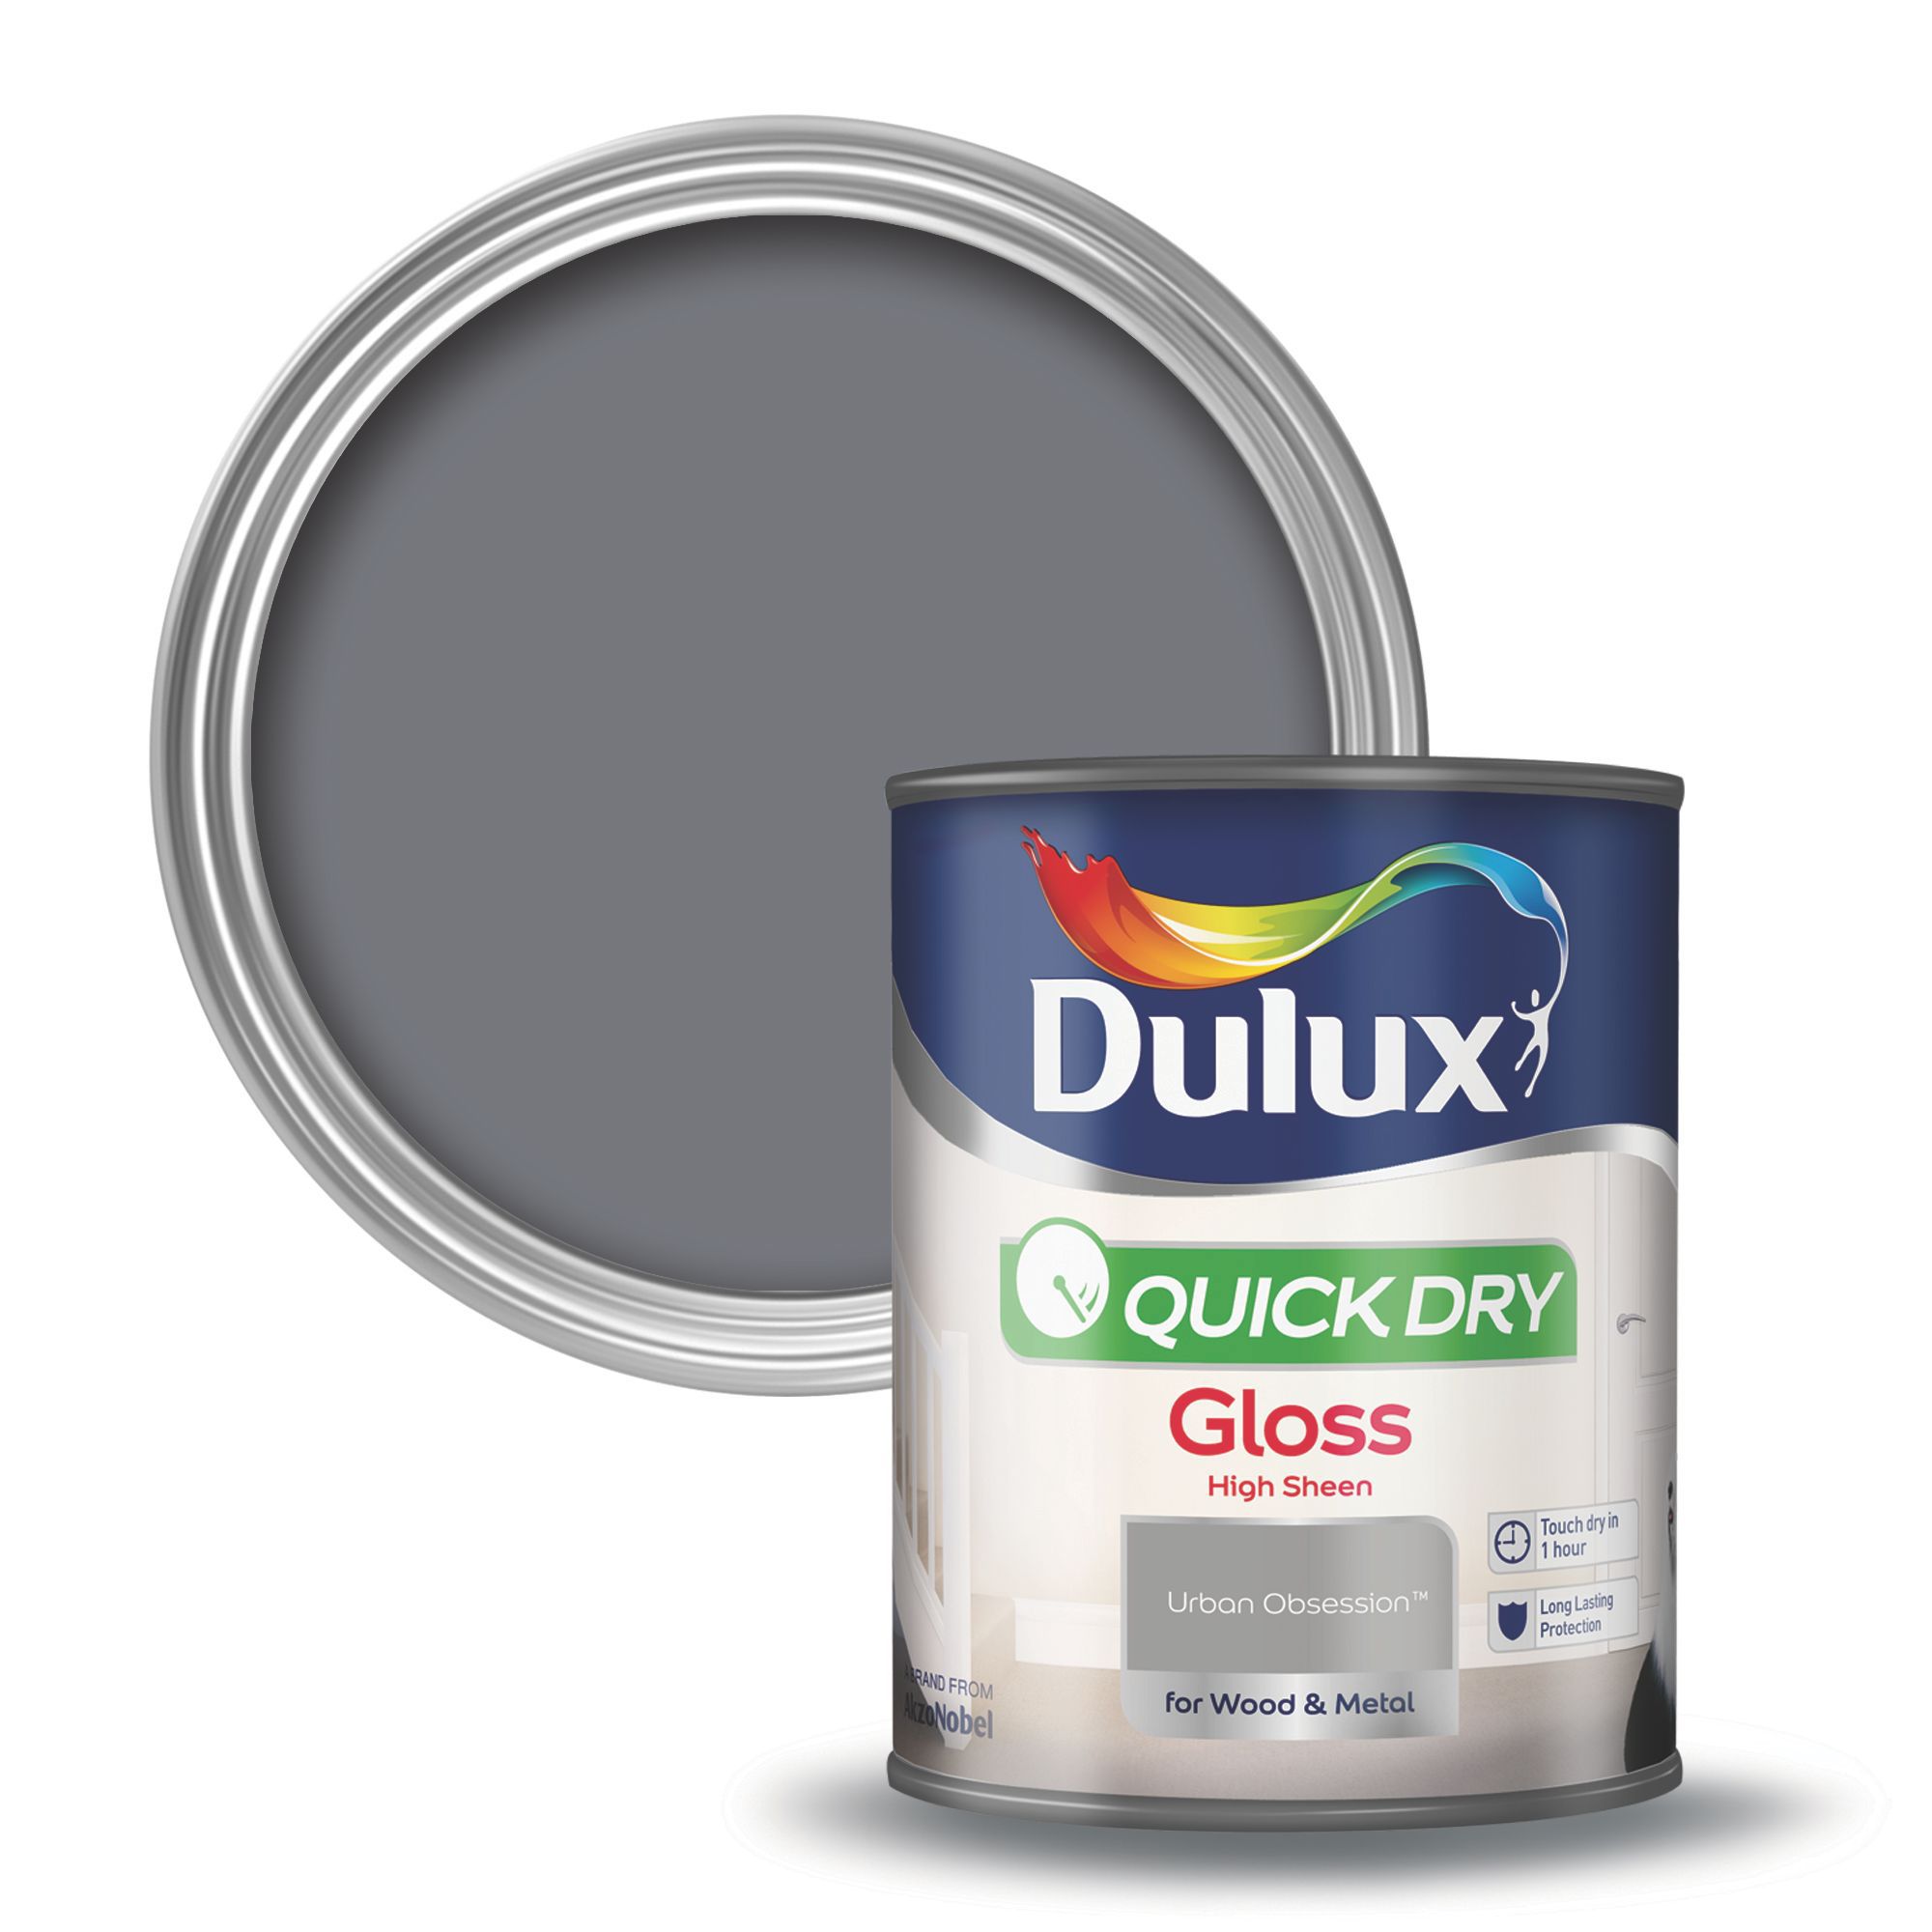 Dulux Urban obsession Gloss Metal & wood paint, 750ml | Tradepoint